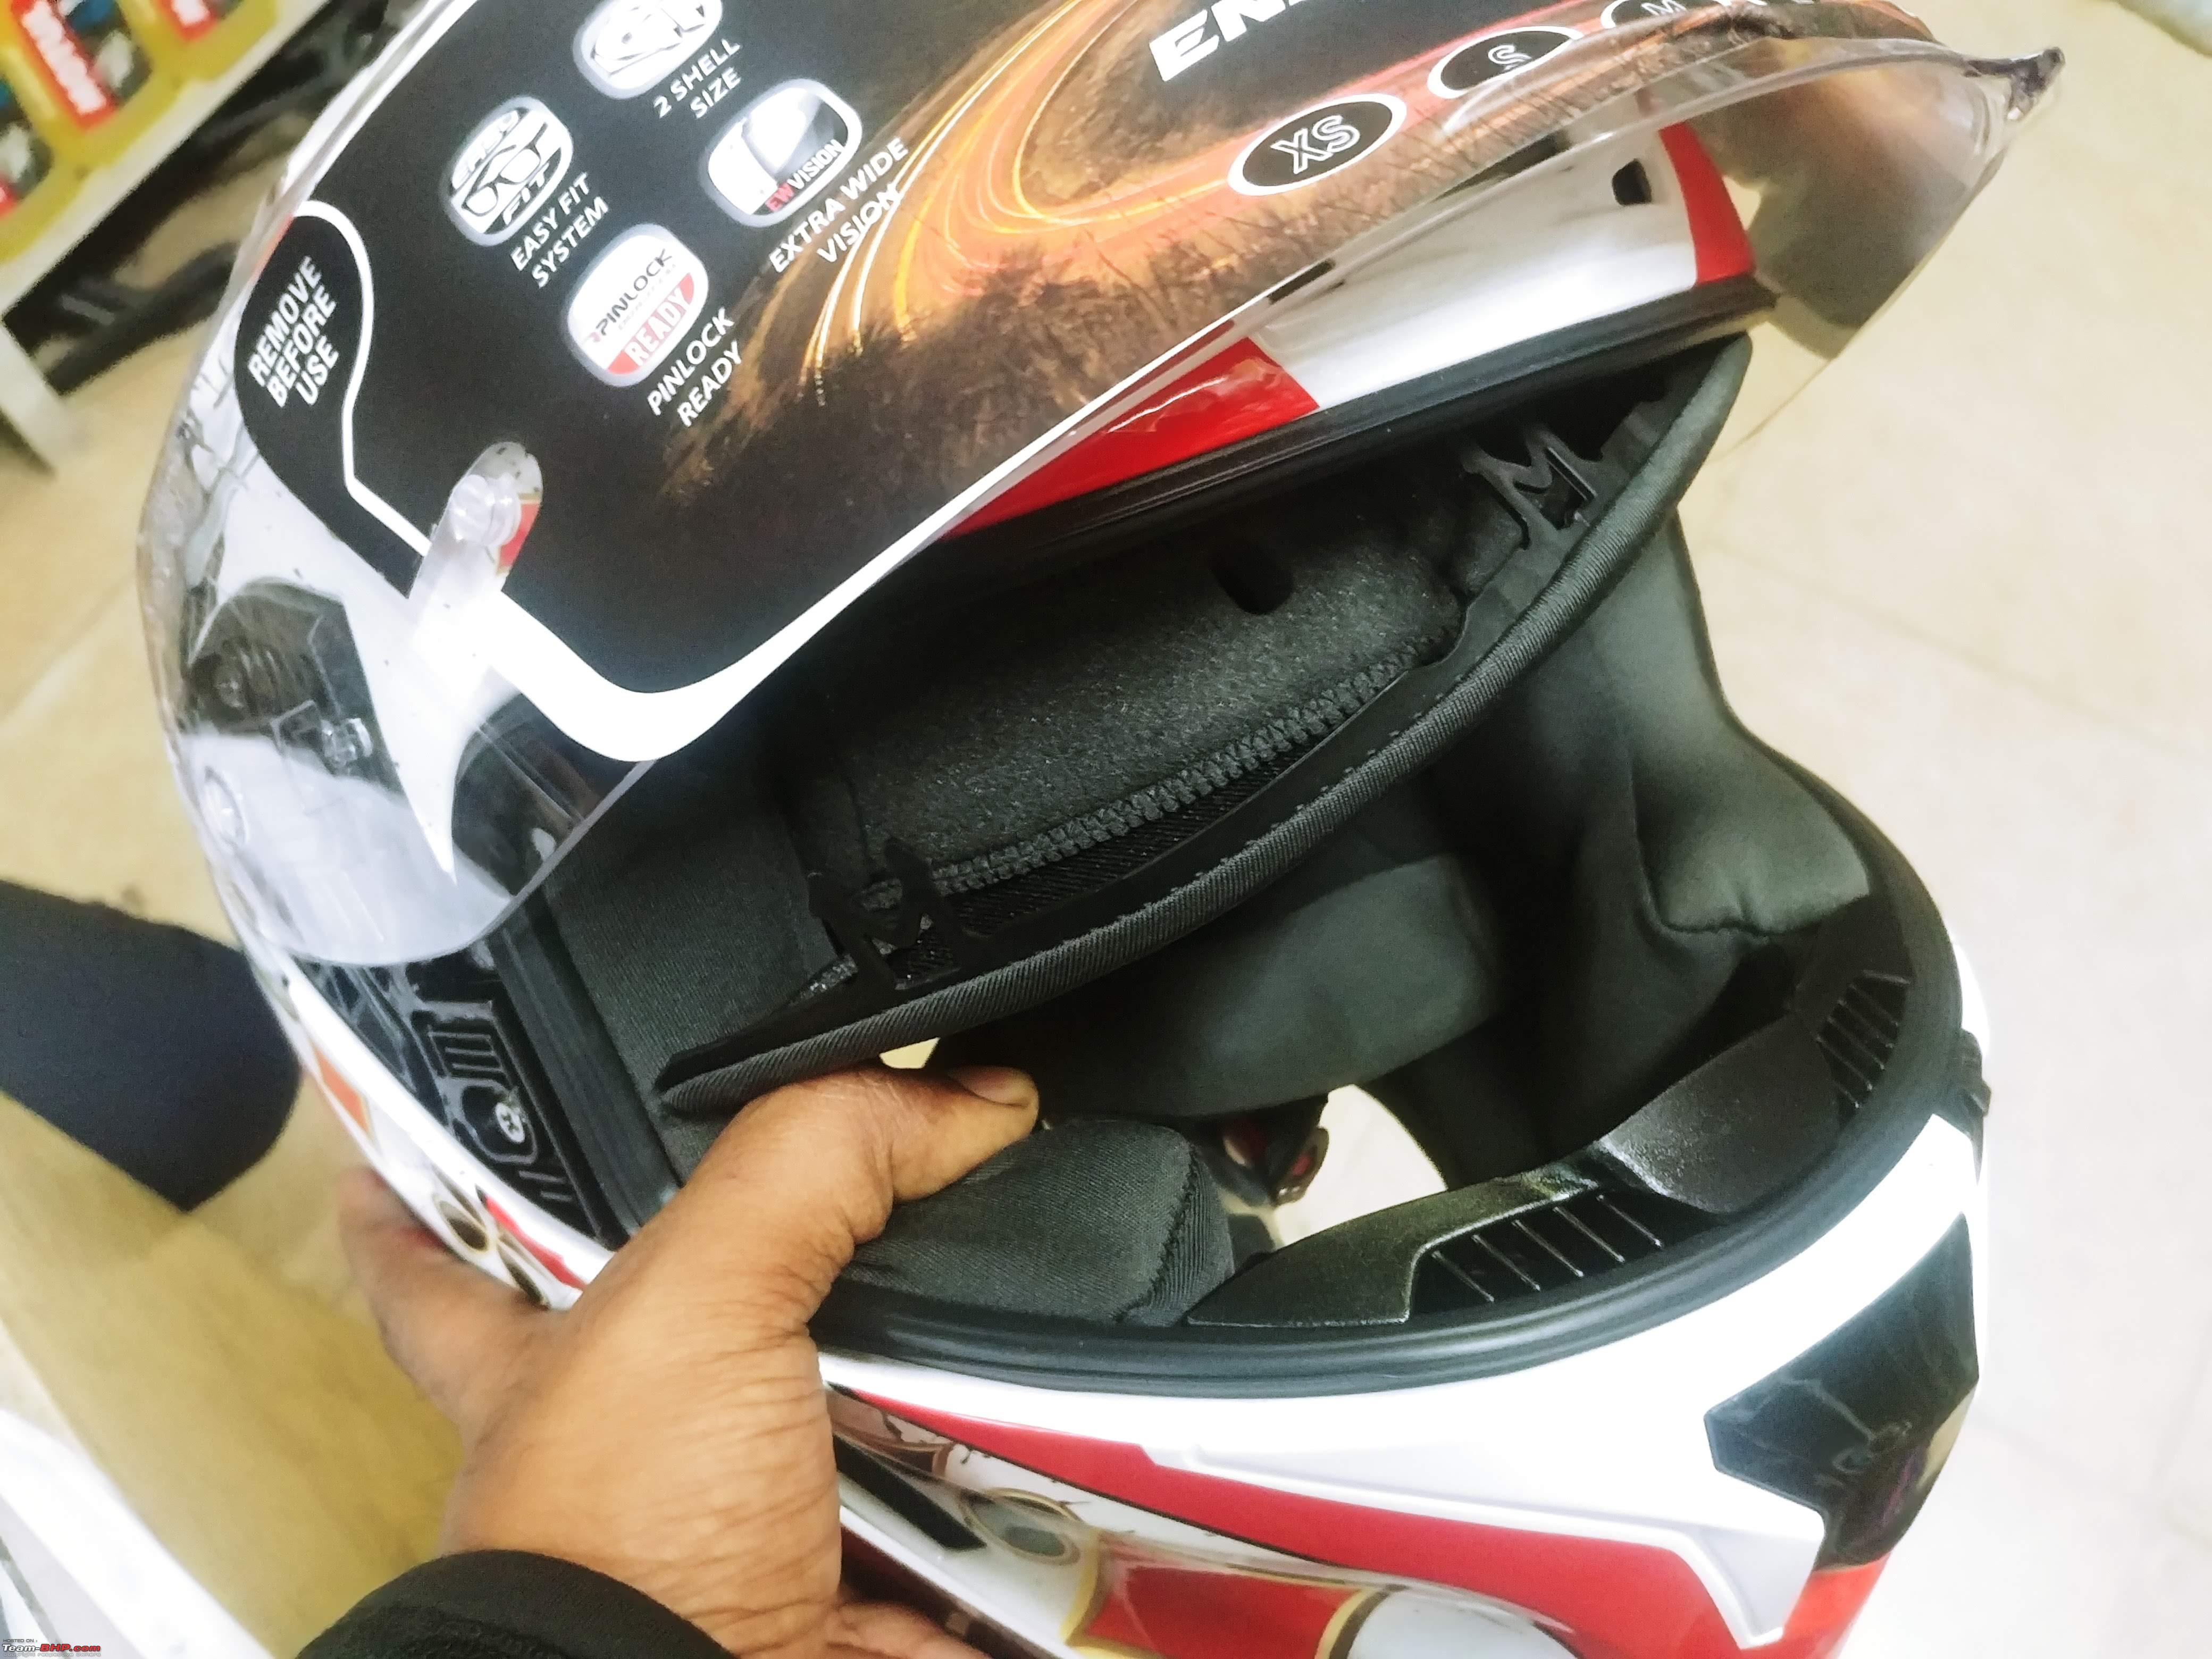 Which Helmet? Tips on buying a good helmet - Page 214 - Team-BHP